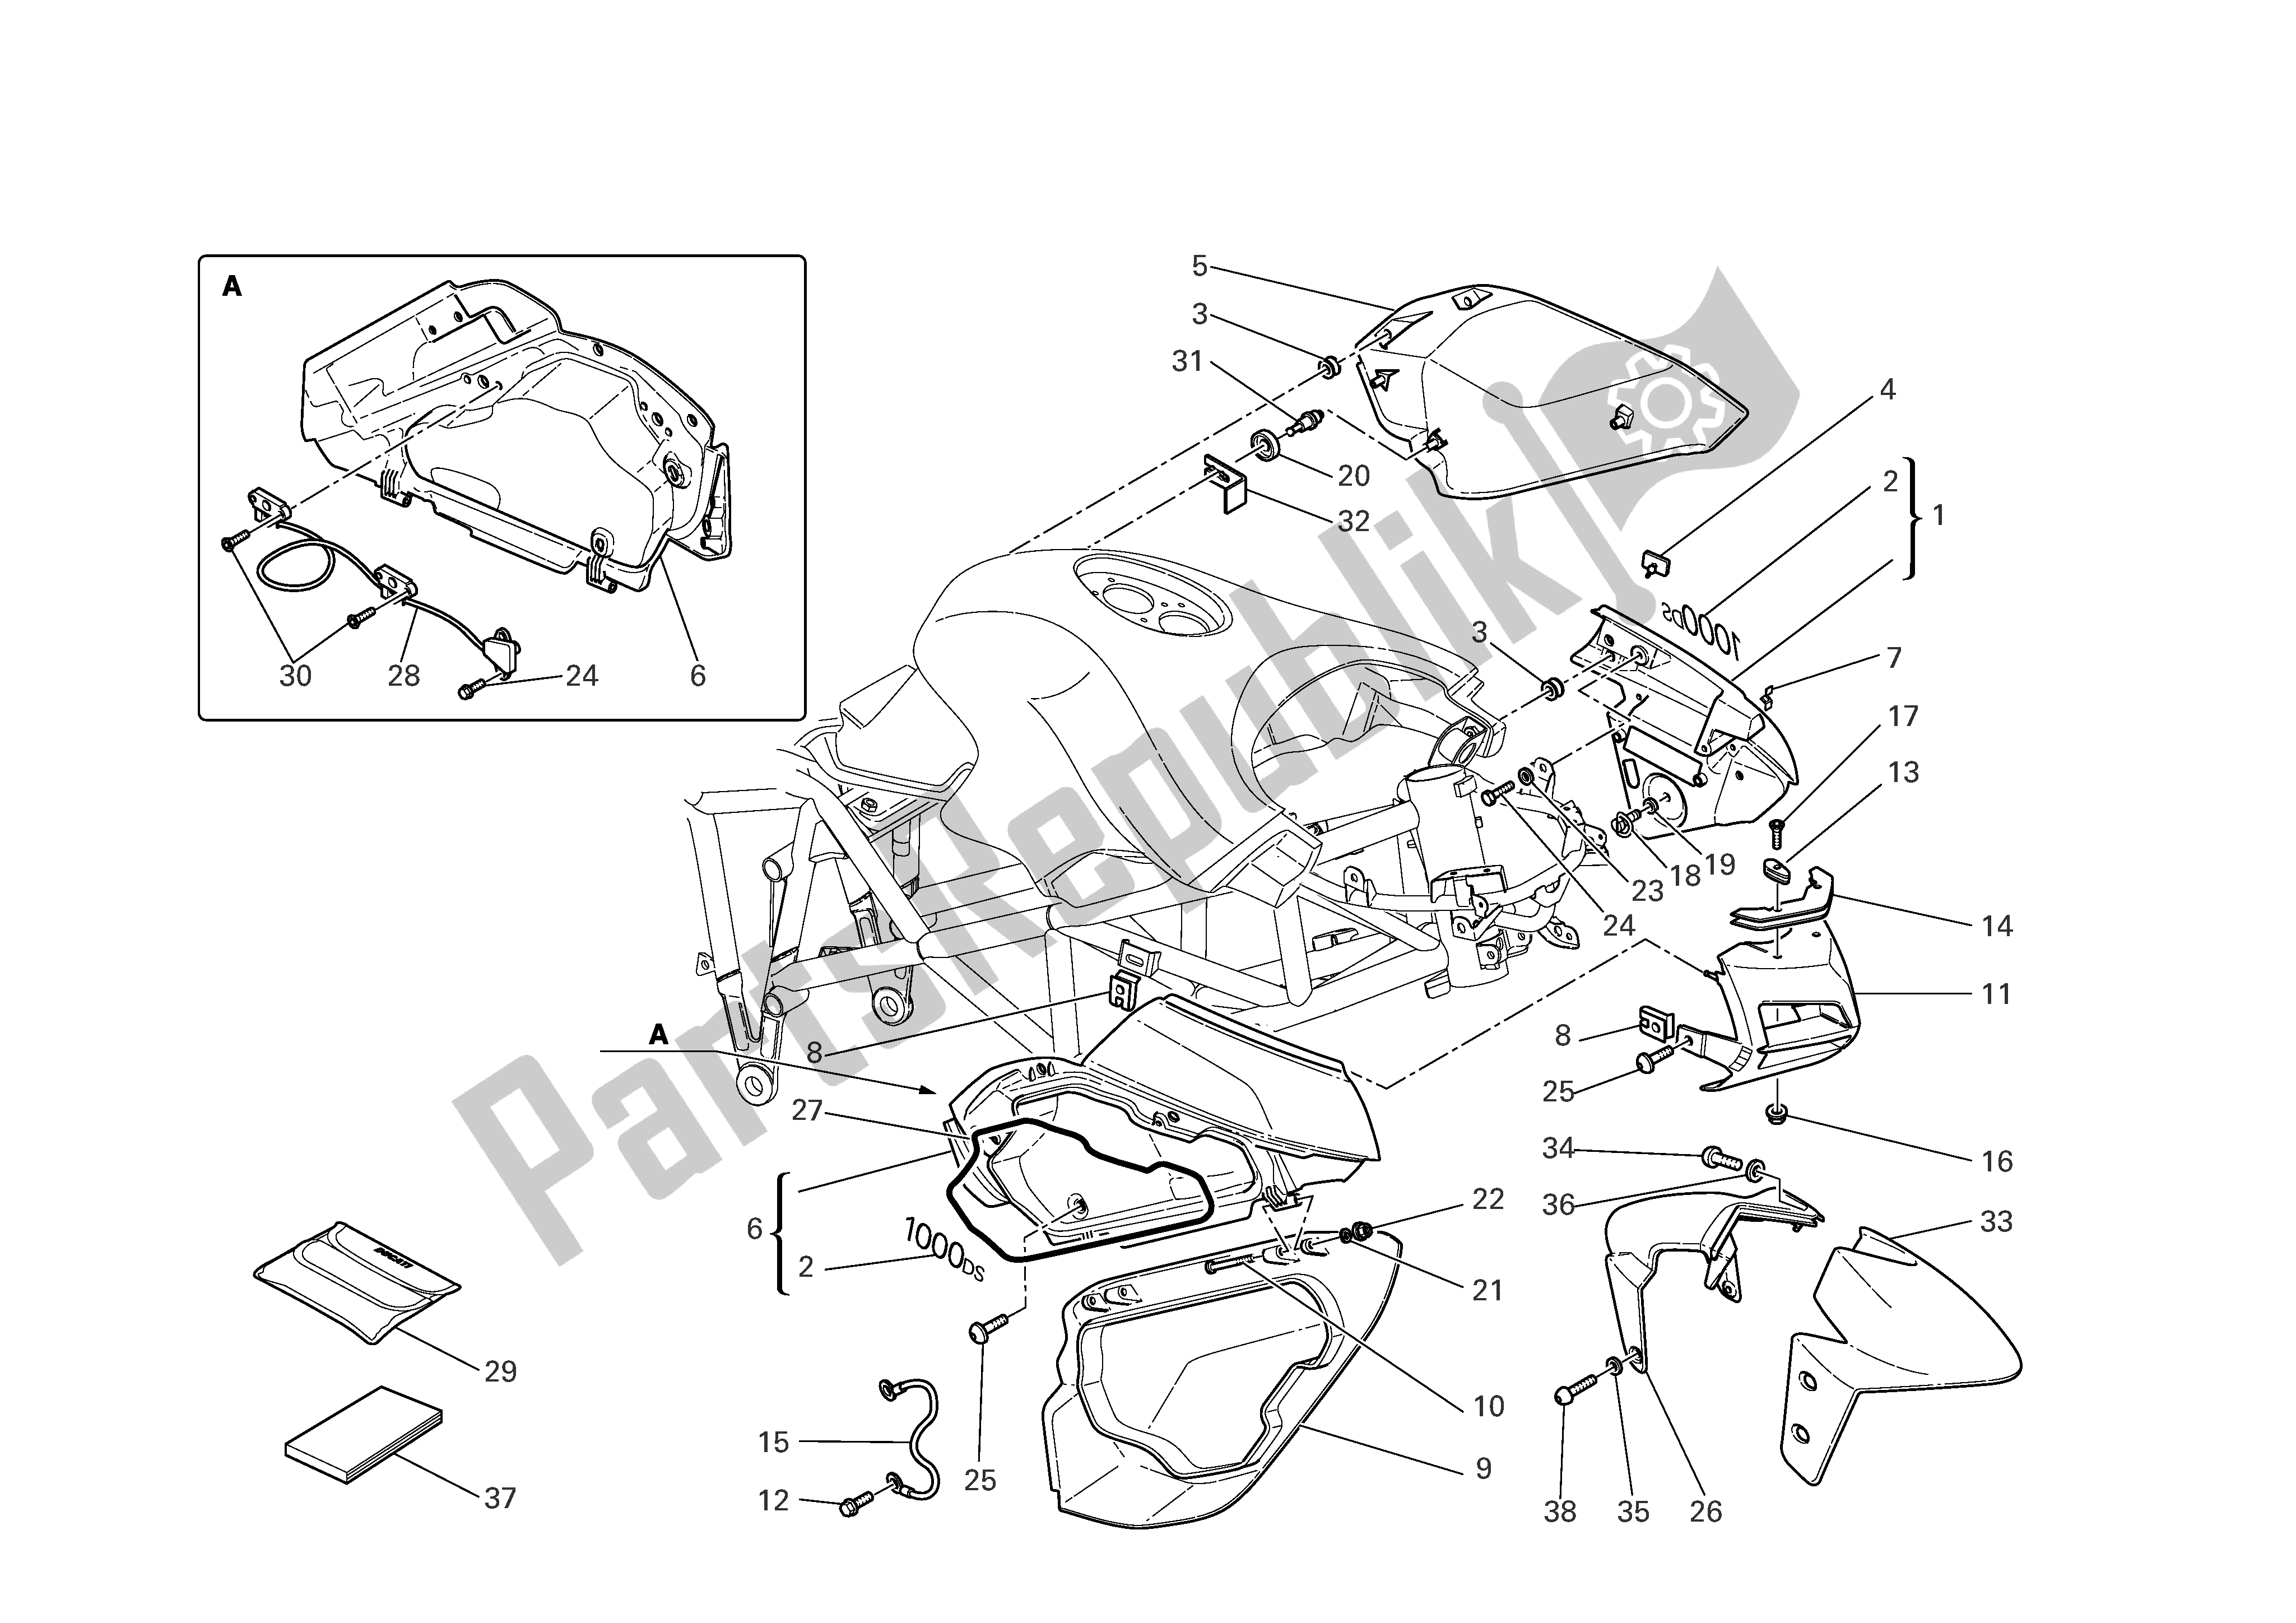 All parts for the Fairing of the Ducati Multistrada 1000 2005